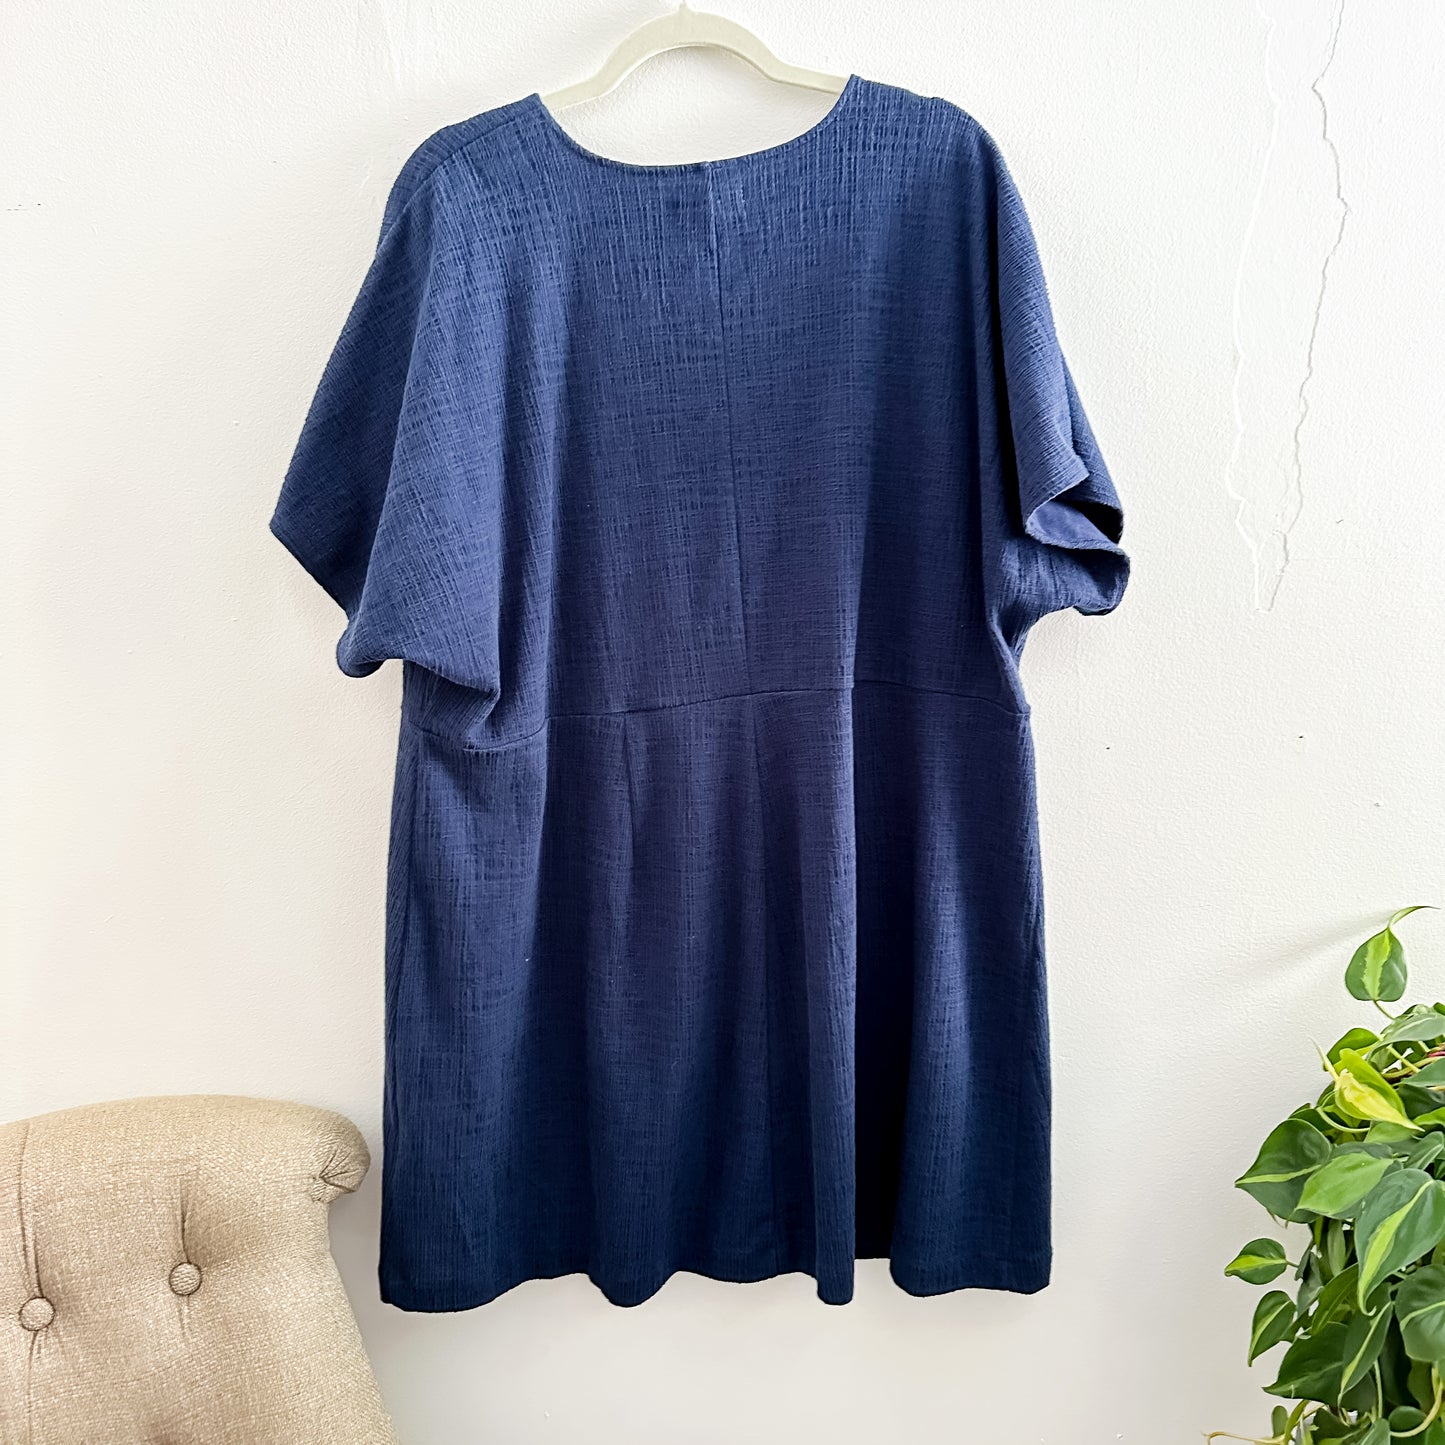 Madewell Navy Faux Wrap Dress (fits 3X)